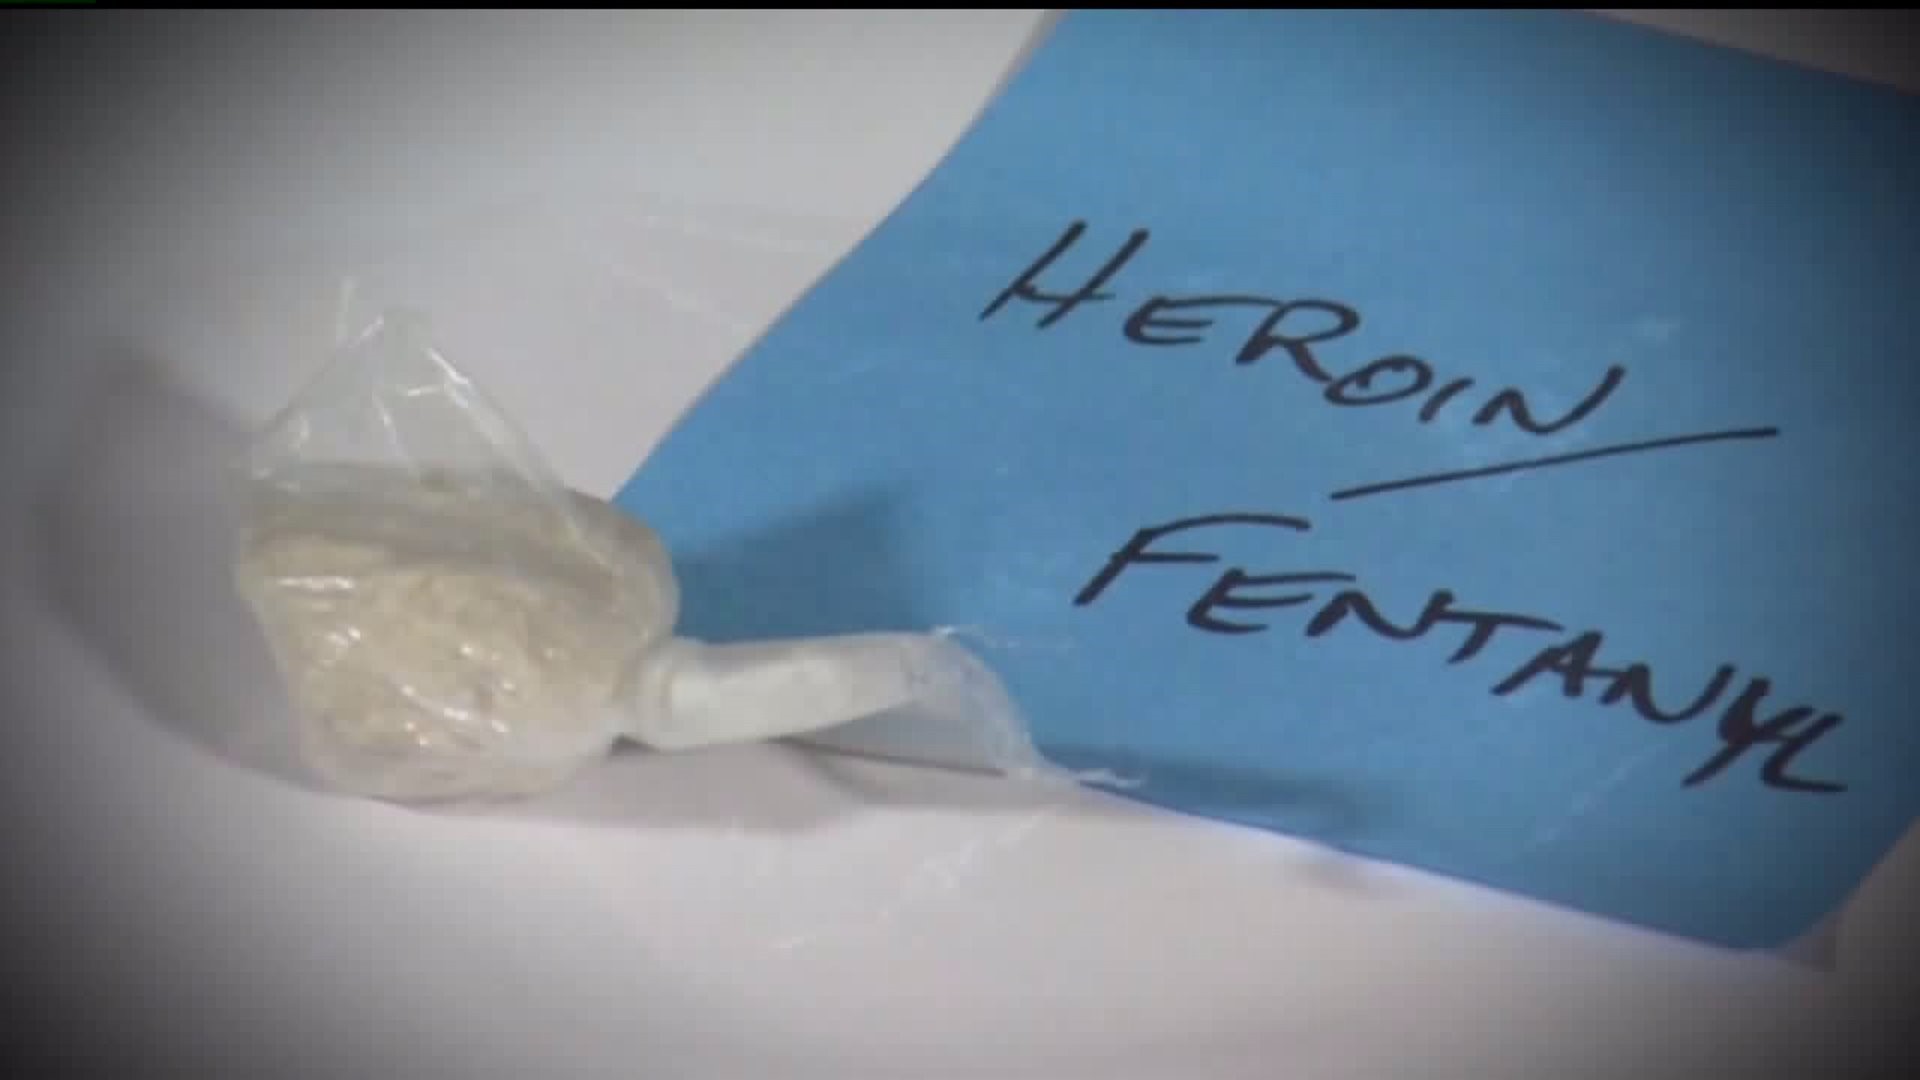 Officer recovering from fentanyl exposure